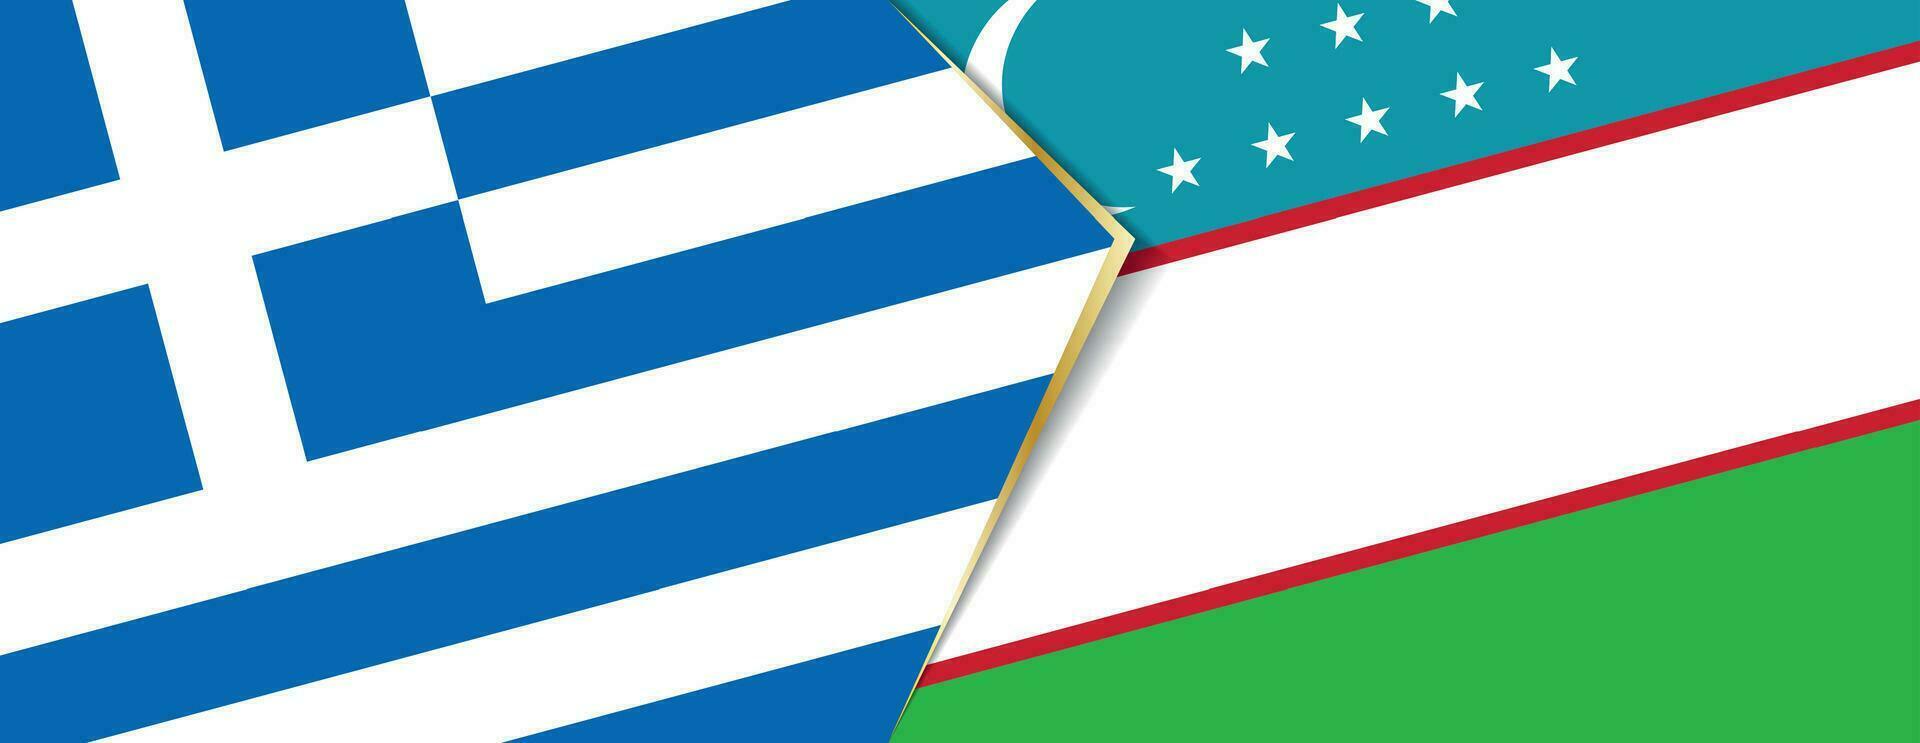 Greece and Uzbekistan flags, two vector flags.